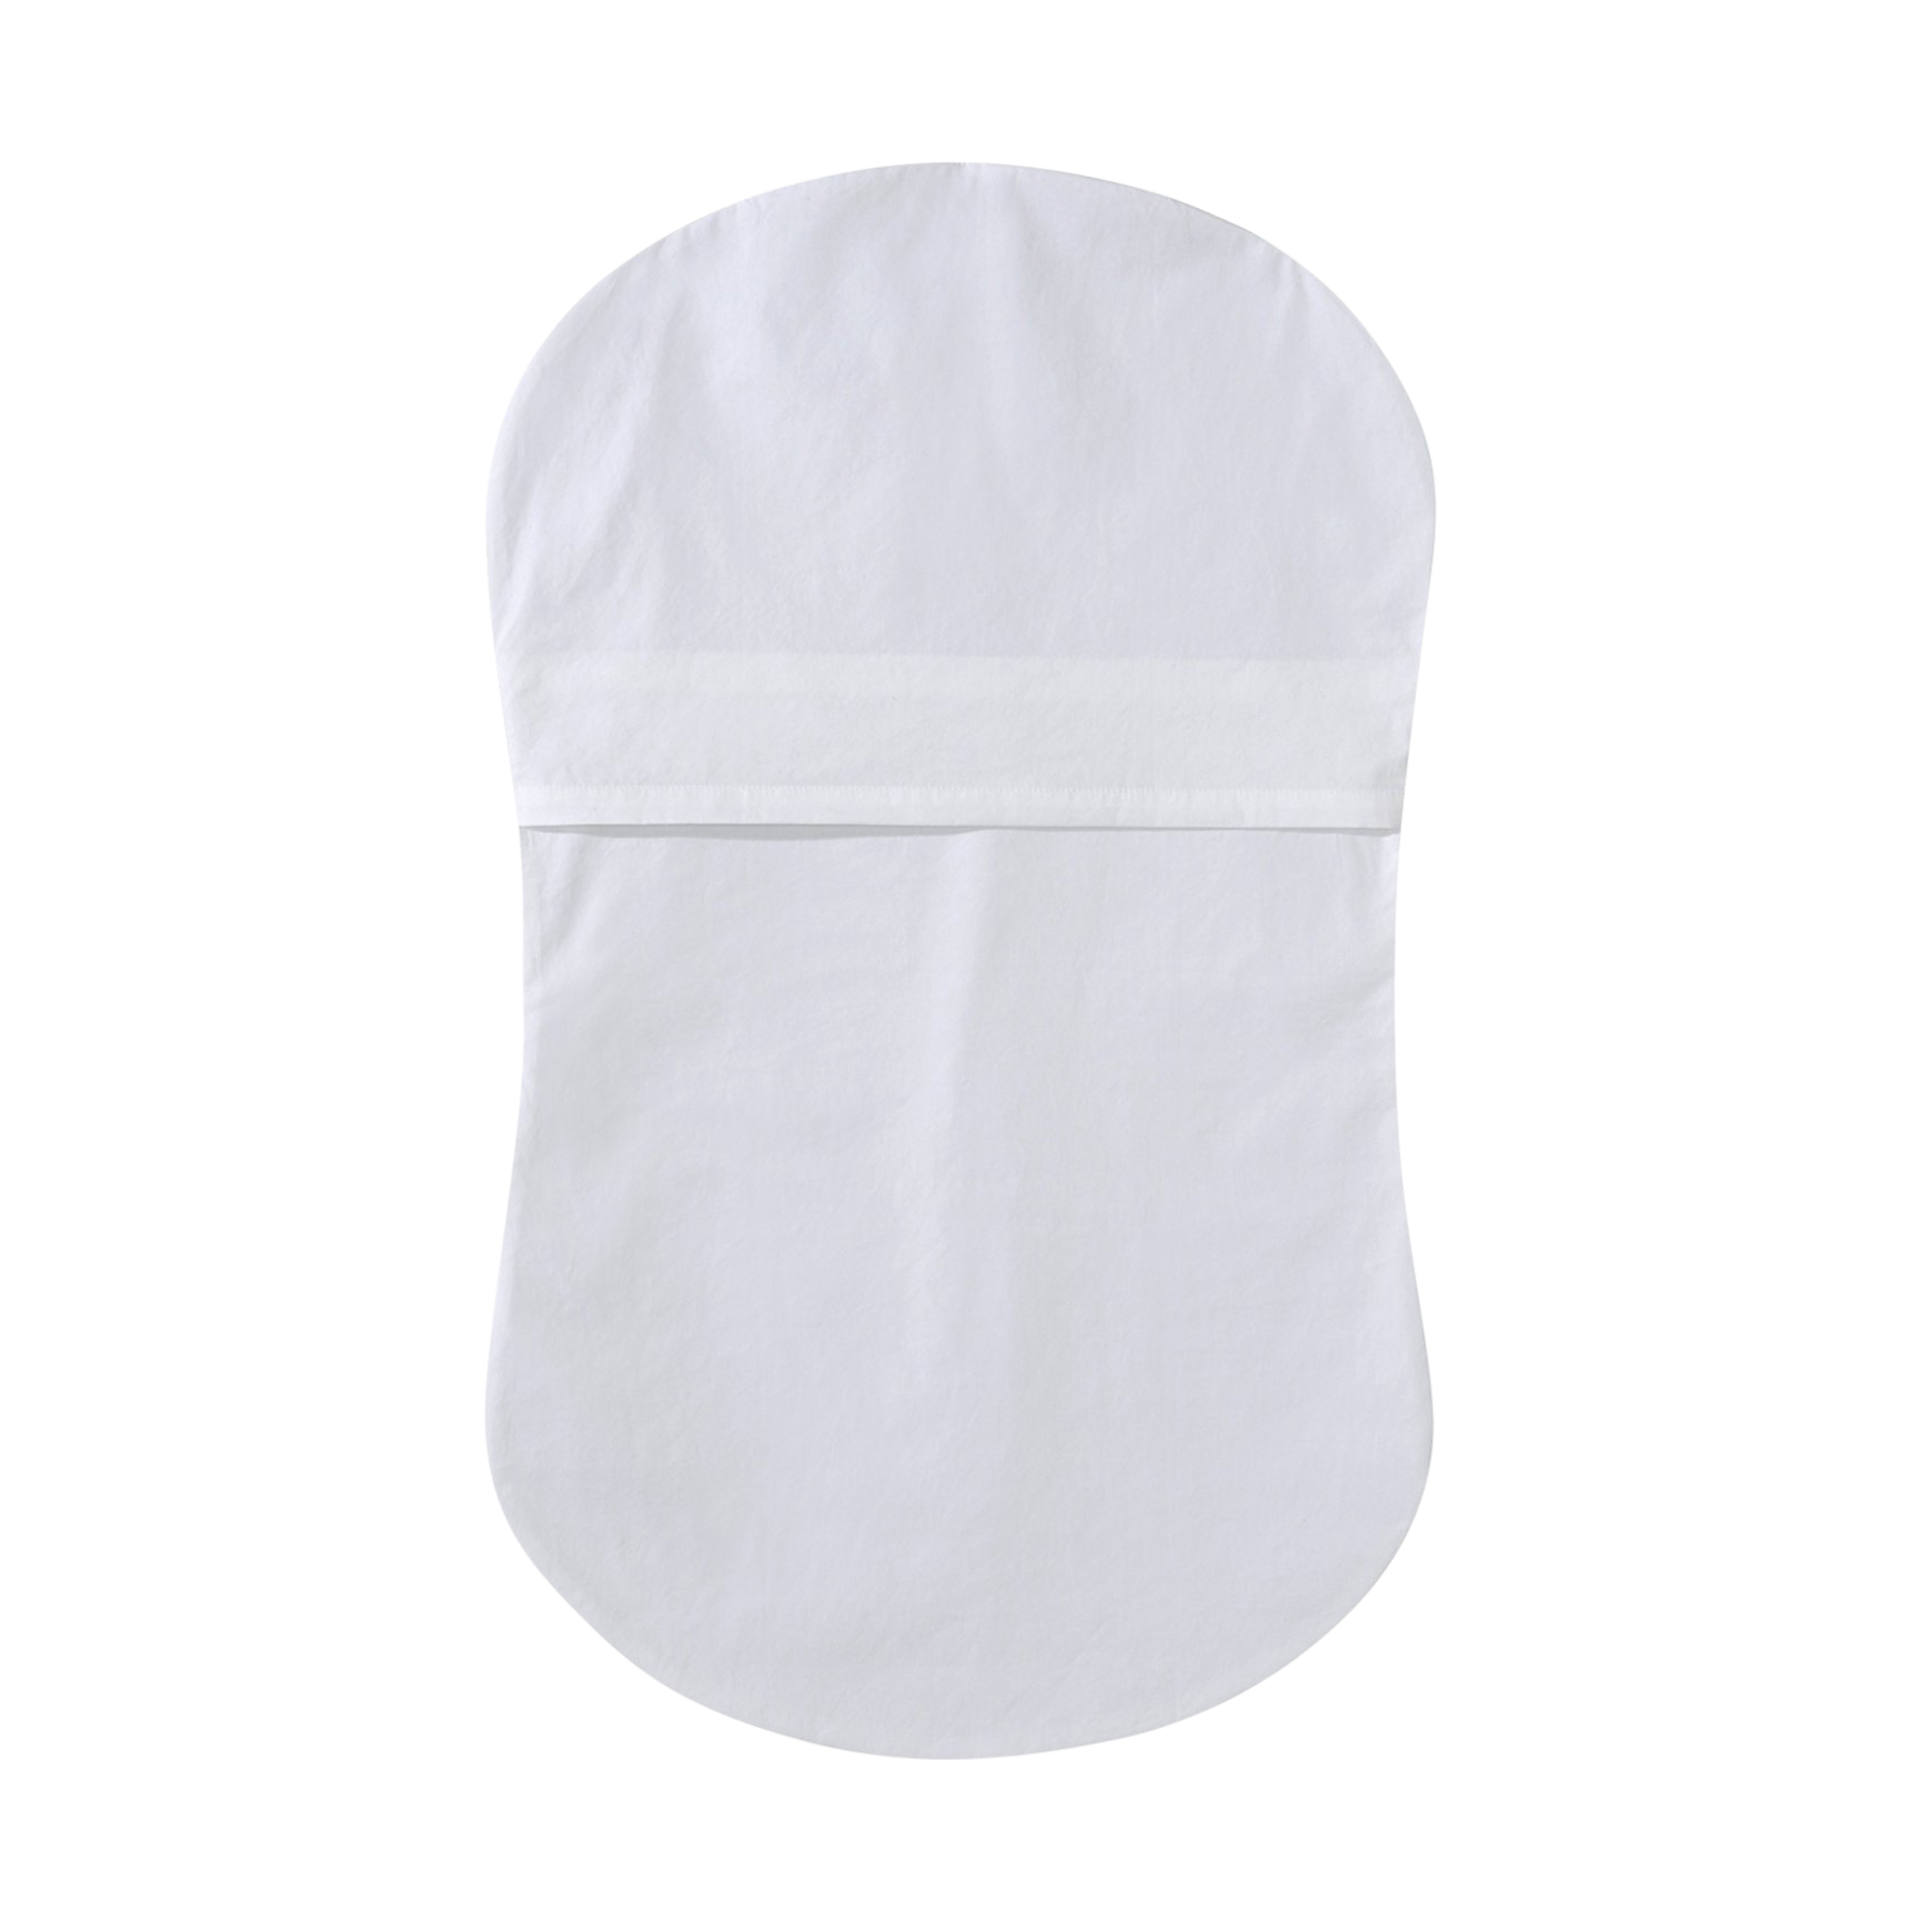 halo bassinest fitted sheet dimensions